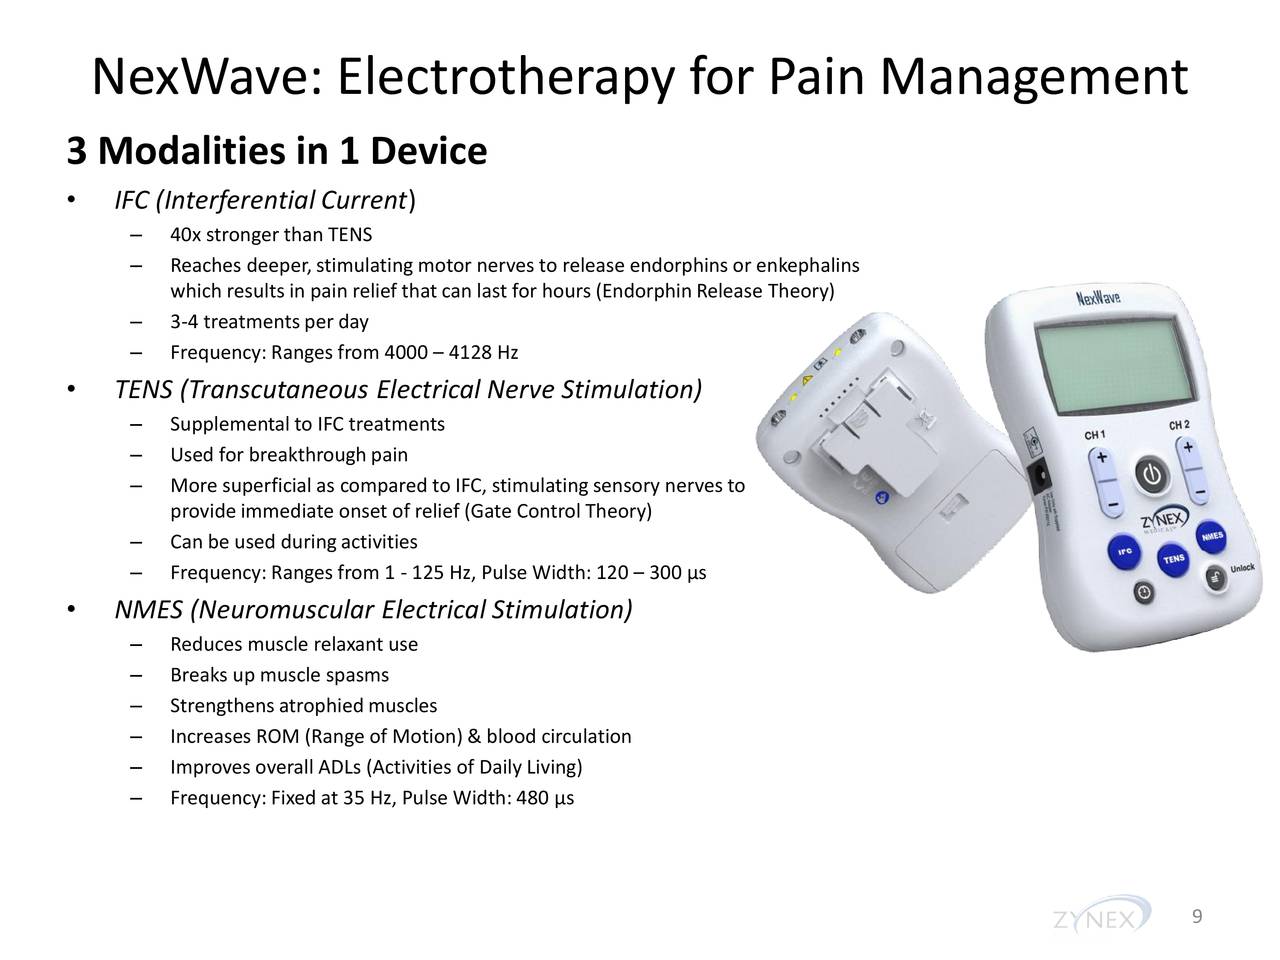 Prescription non opioid non invasive pain management through medical  devices by Zynex Medical in Plainfield, NJ - Alignable